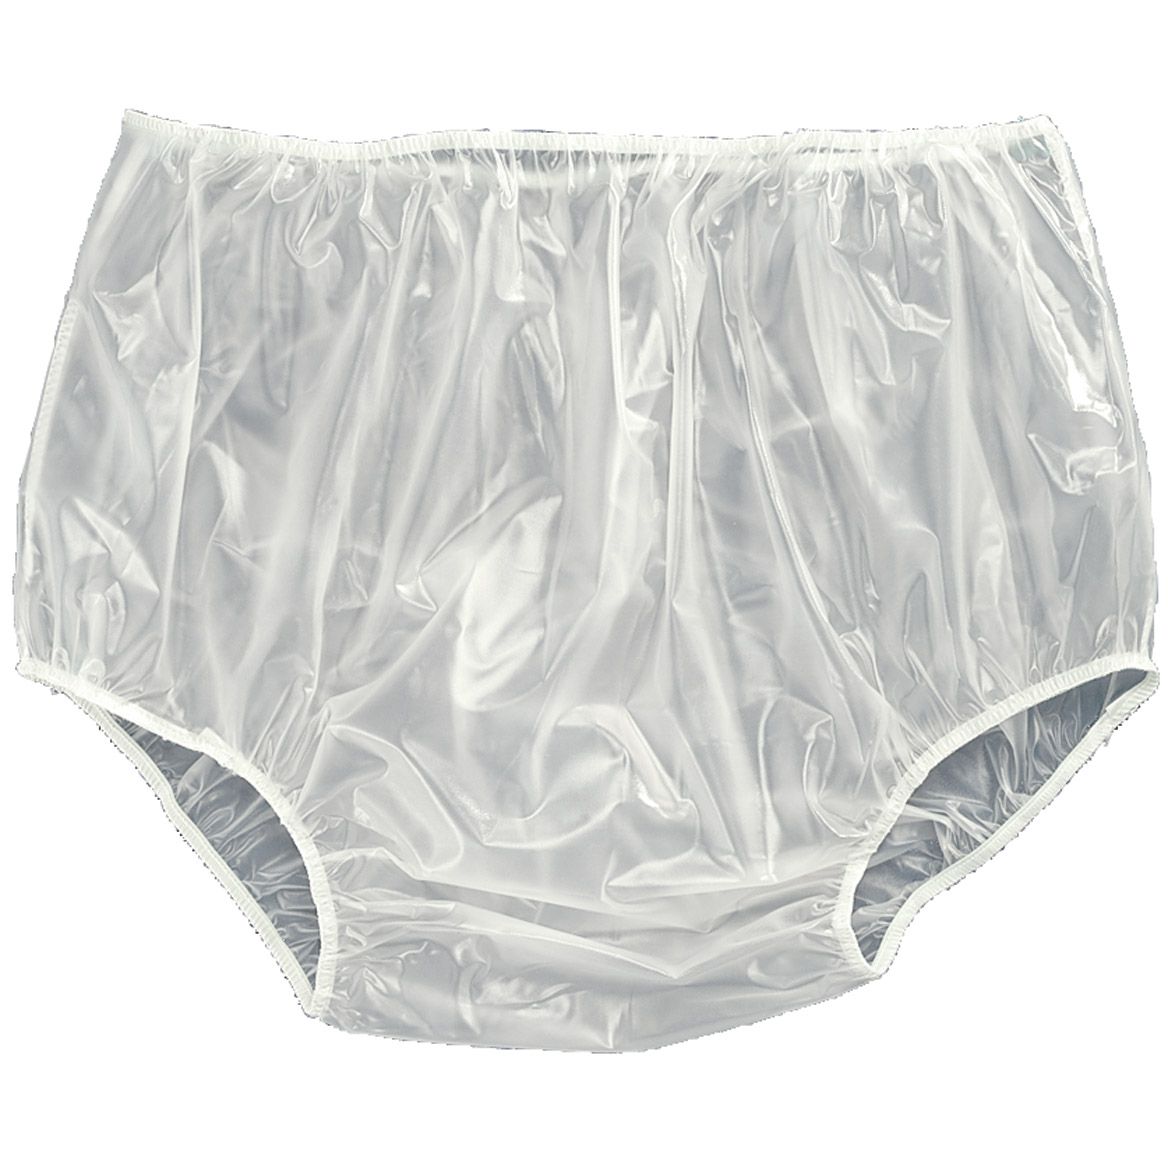 Leakproof Underwear For Women Incontinence,leak Proof Protective Pants